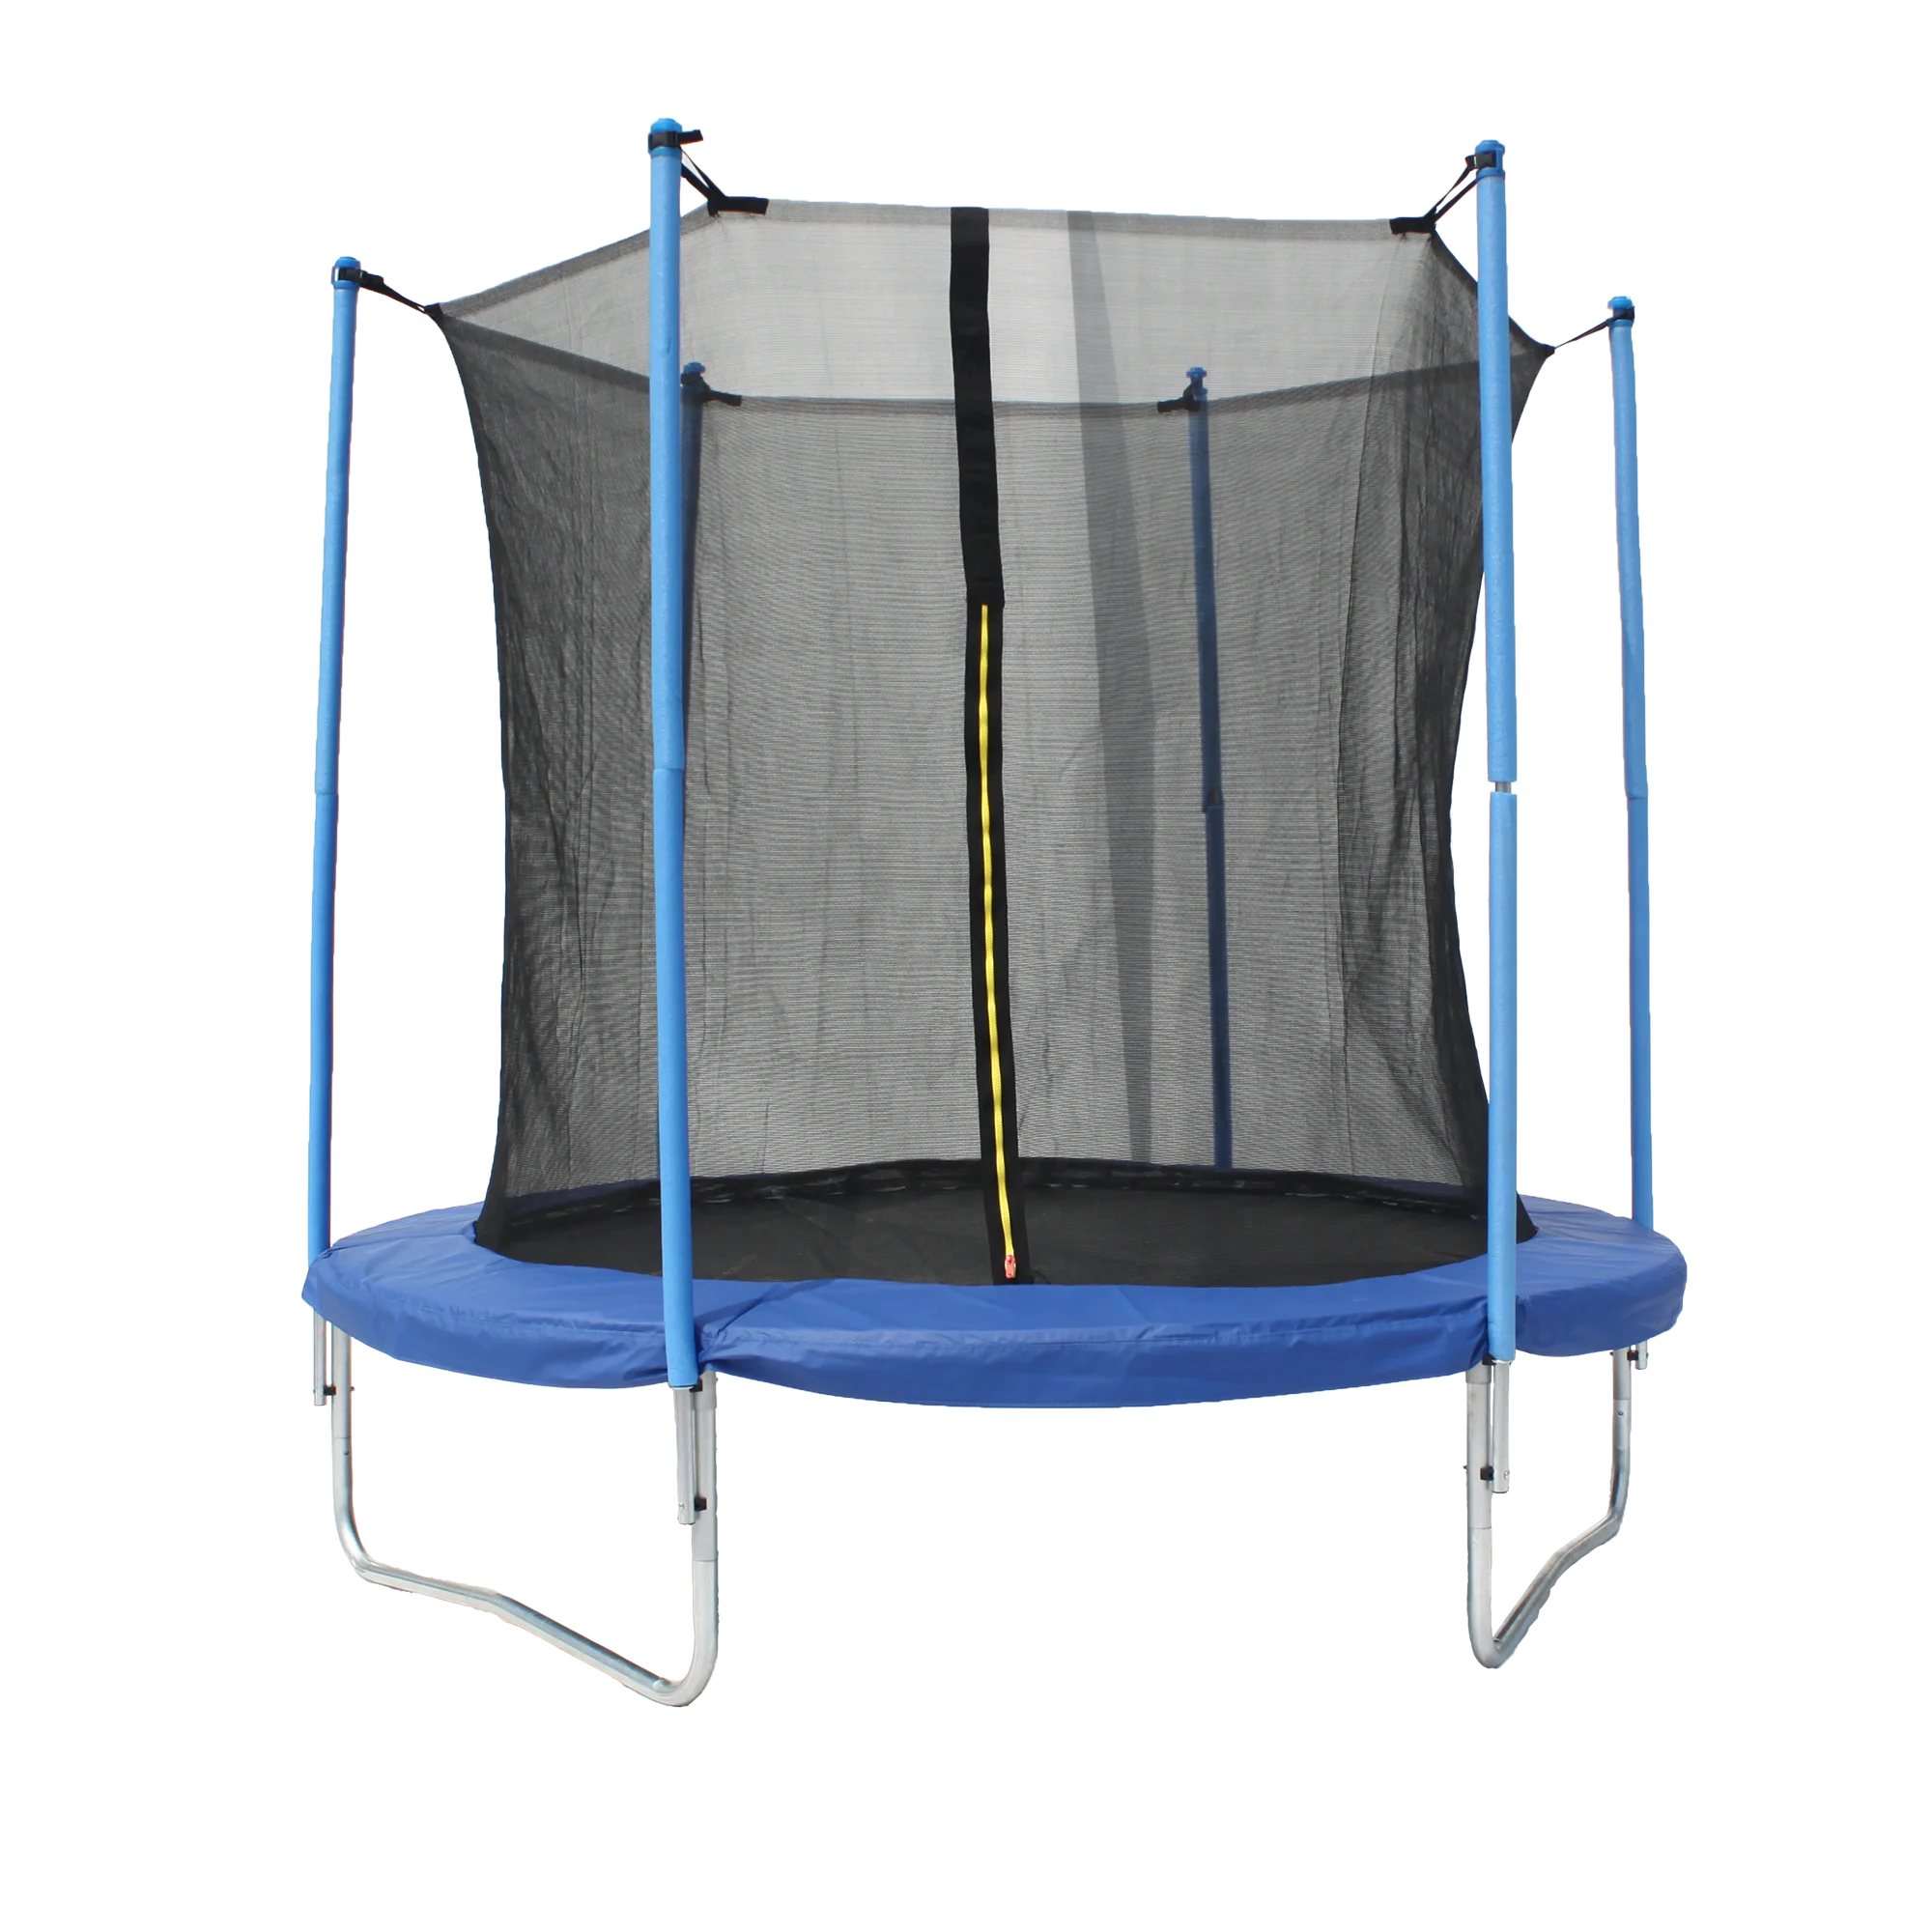 baoxiang 8ft trampoline with security net and lights indoor jumping trampoline